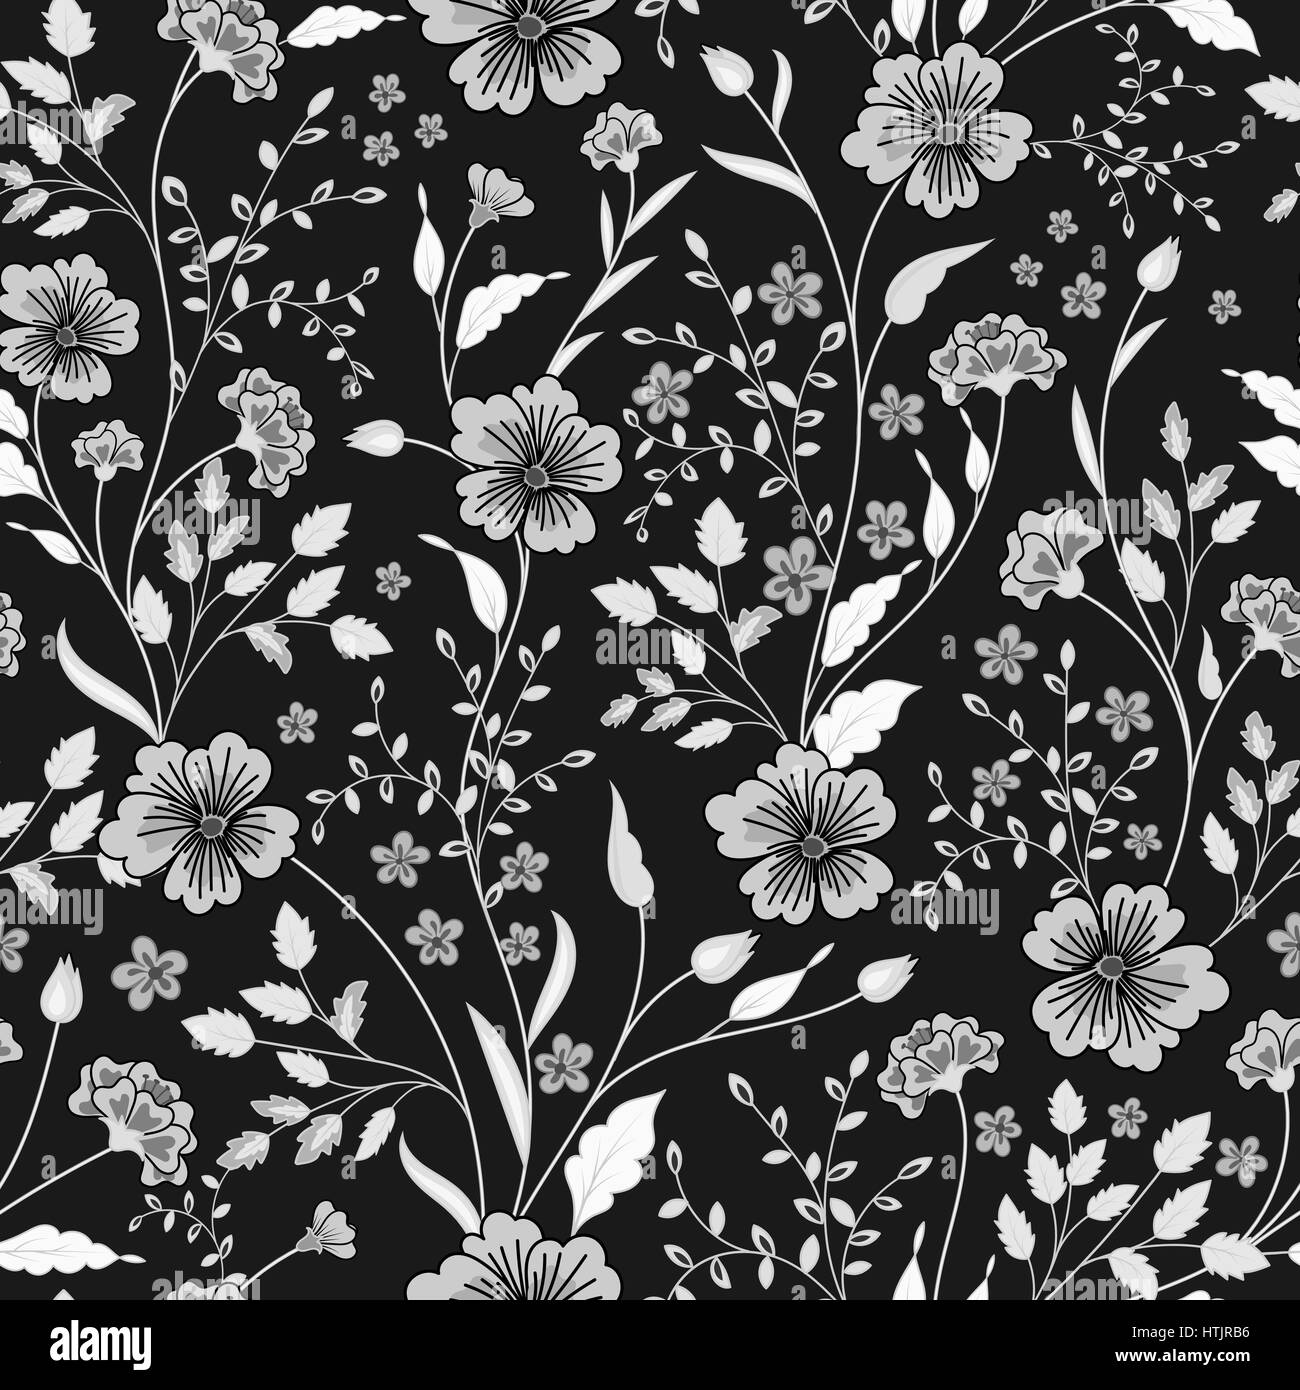 Floral print Black and White Stock Photos & Images - Alamy